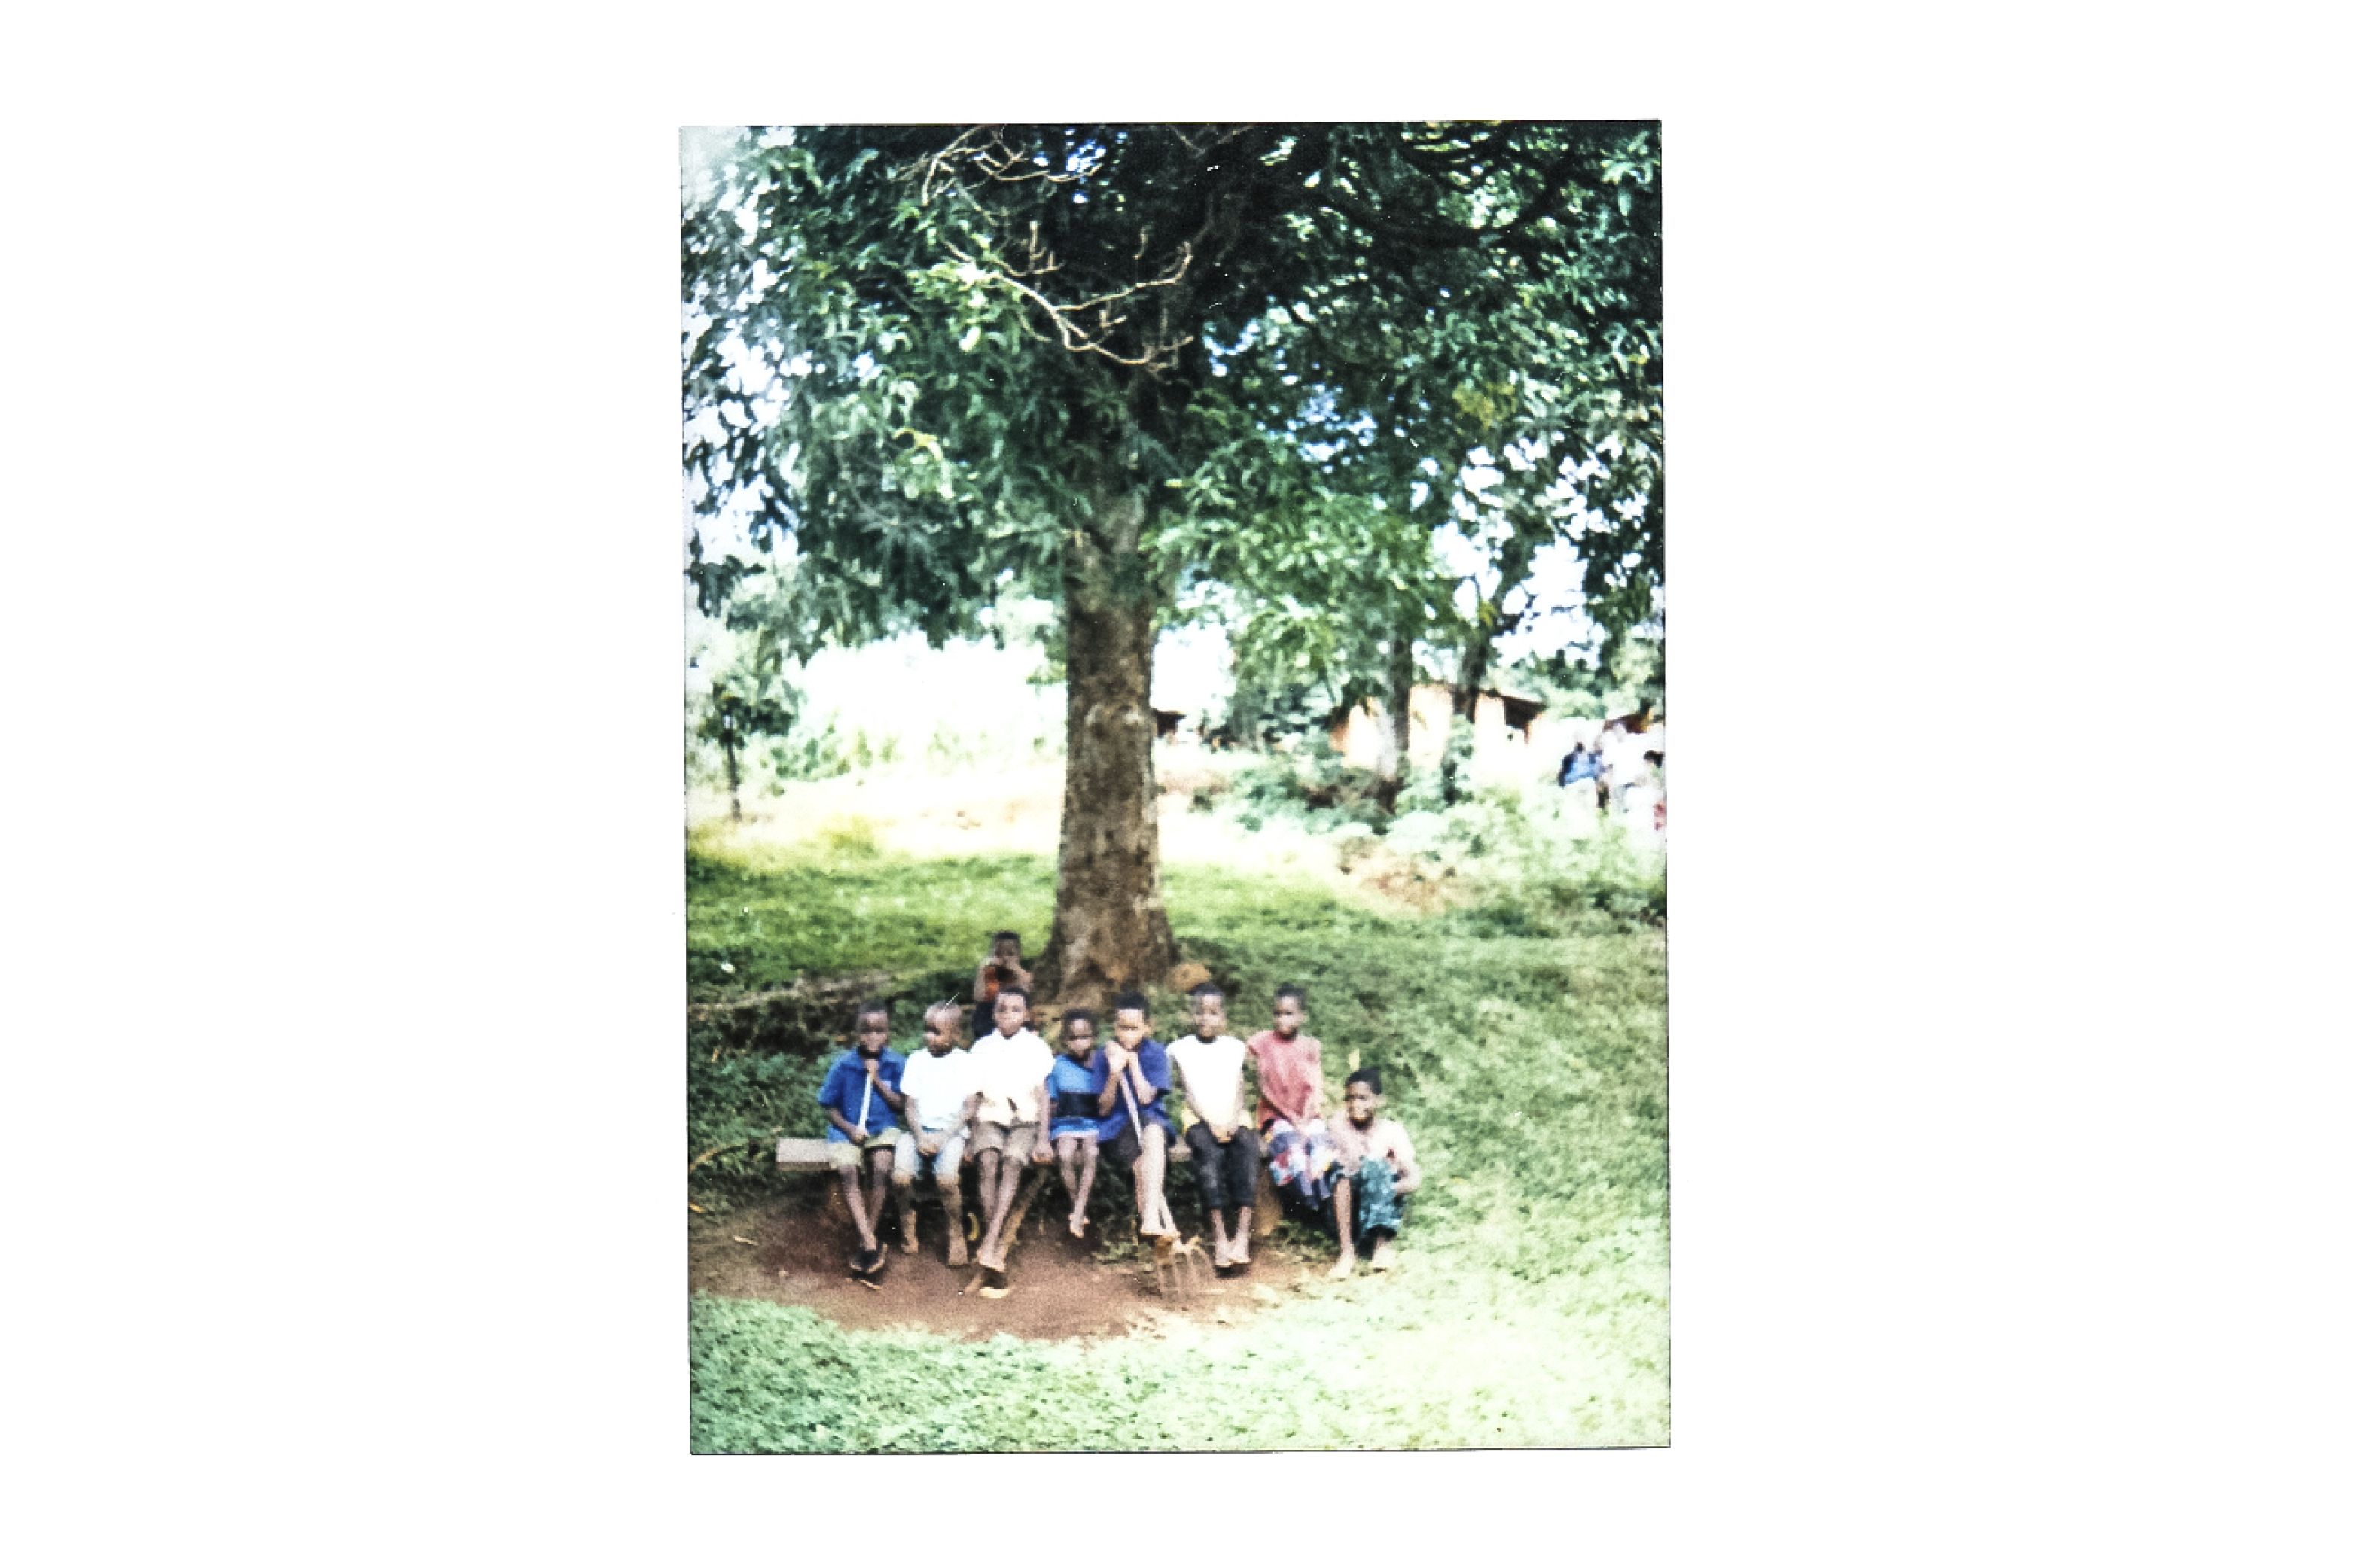 Kids under a tree in Mulema village The village chief has issued a strict law against the felling of trees, and people are encouraged to replant. Image by Nathalie Bertrams. Malawi, 2017. 